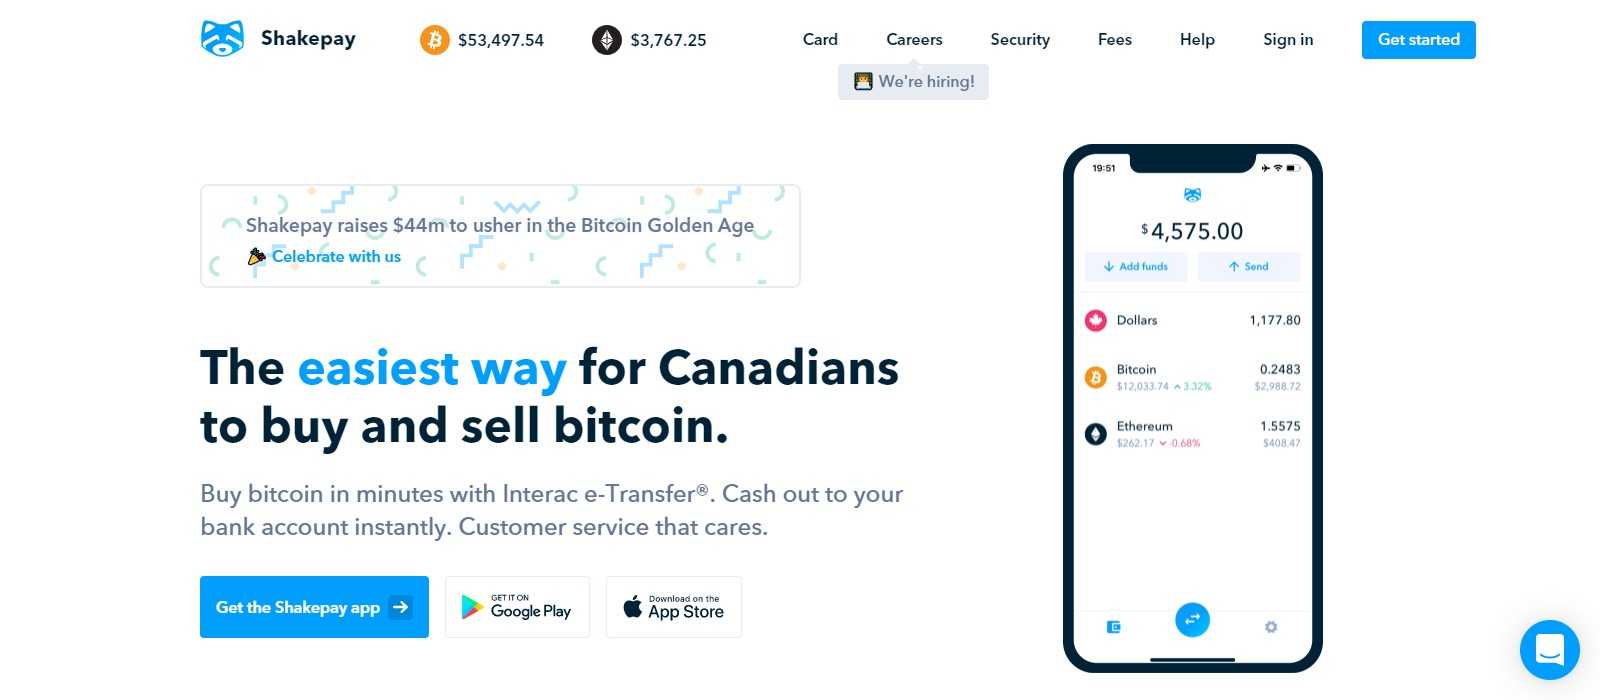 Shakepay Affiliate Program Review: $30 CAD After Referral buys $100 of Crypto Currency